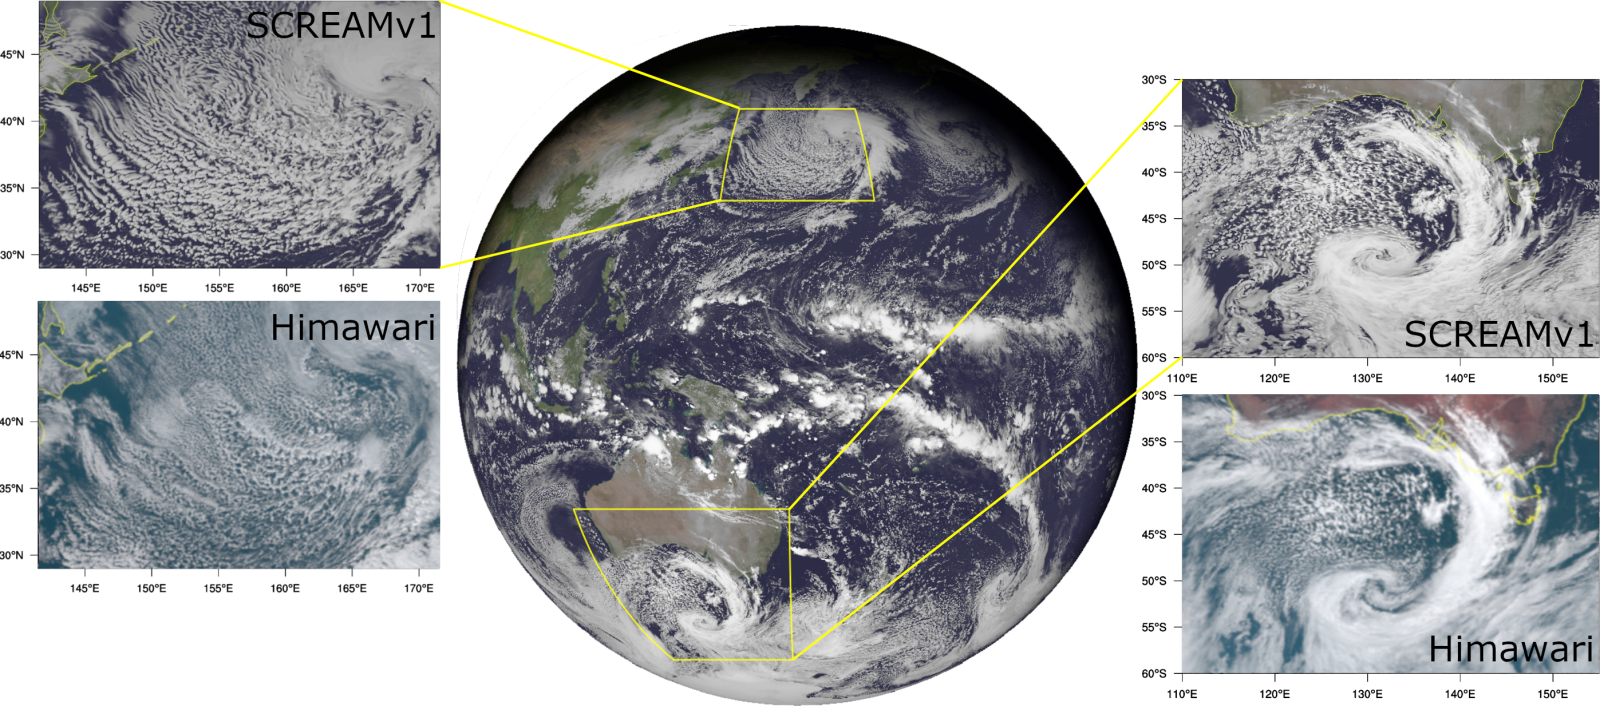 Figure 1: Snapshots of outgoing shortwave radiative flux at model top from a January SCREAM simulation, taken two days into the simulation (2020-01-22 at 02:00:00 UTC). The orthographic projection in the middle panel shows model clouds represented by shortwave flux superimposed on a NASA Blue Marble image (NASA Visible Earth – Home). The insets show comparisons against Himawari-8 visible satellite imagery for two scenes: a cold air outbreak event near Siberia (left), and a cyclone south of Australia (right).